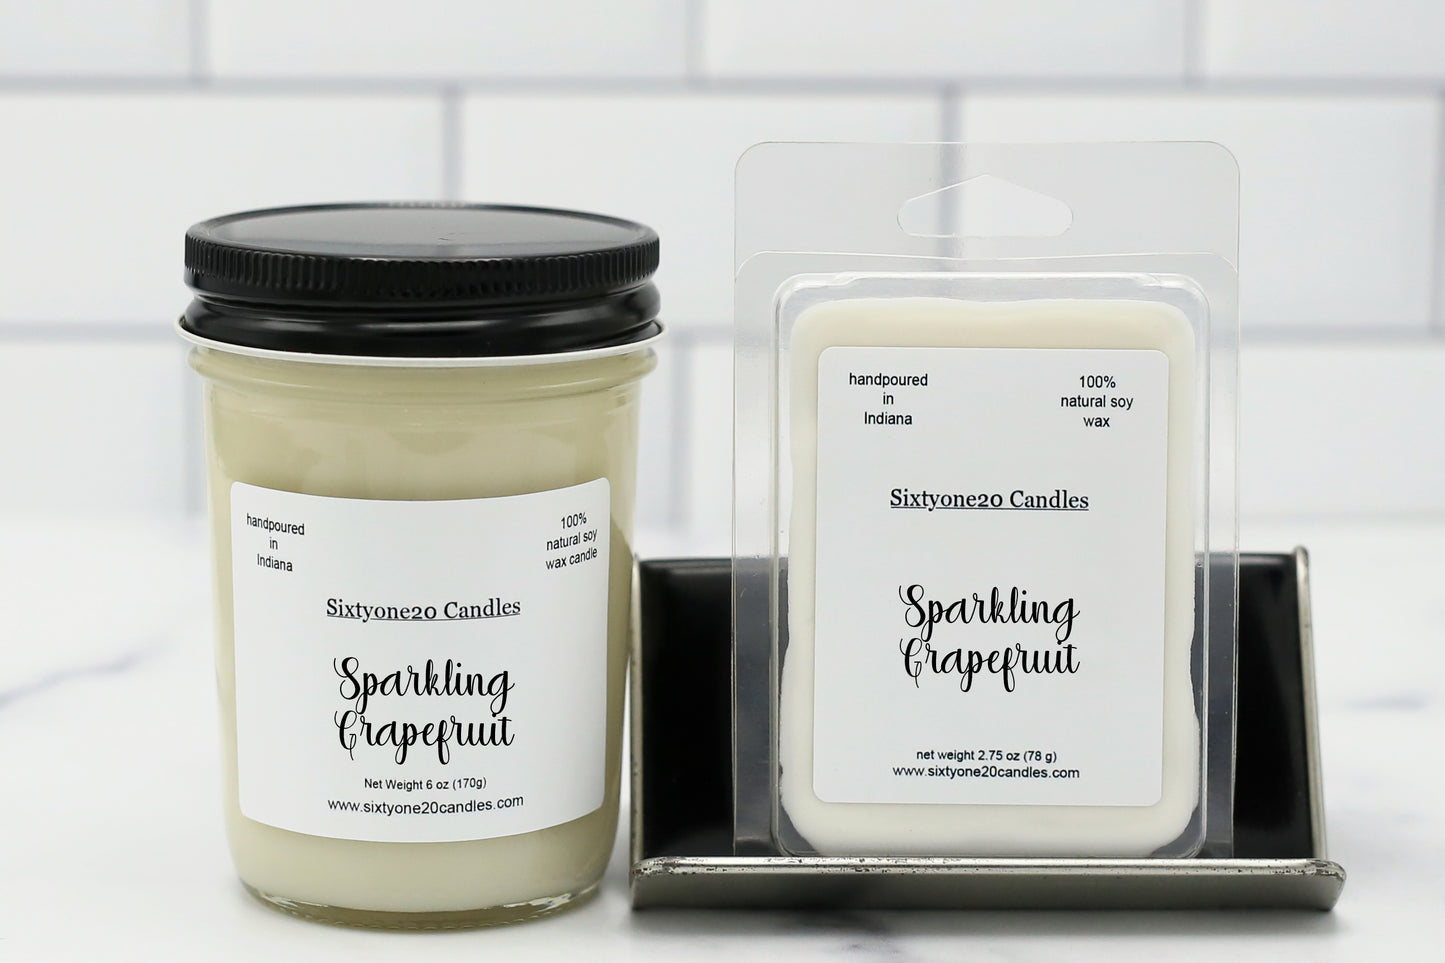 Sparkling Grapefruit 100% Soy Wax Candle and Melt